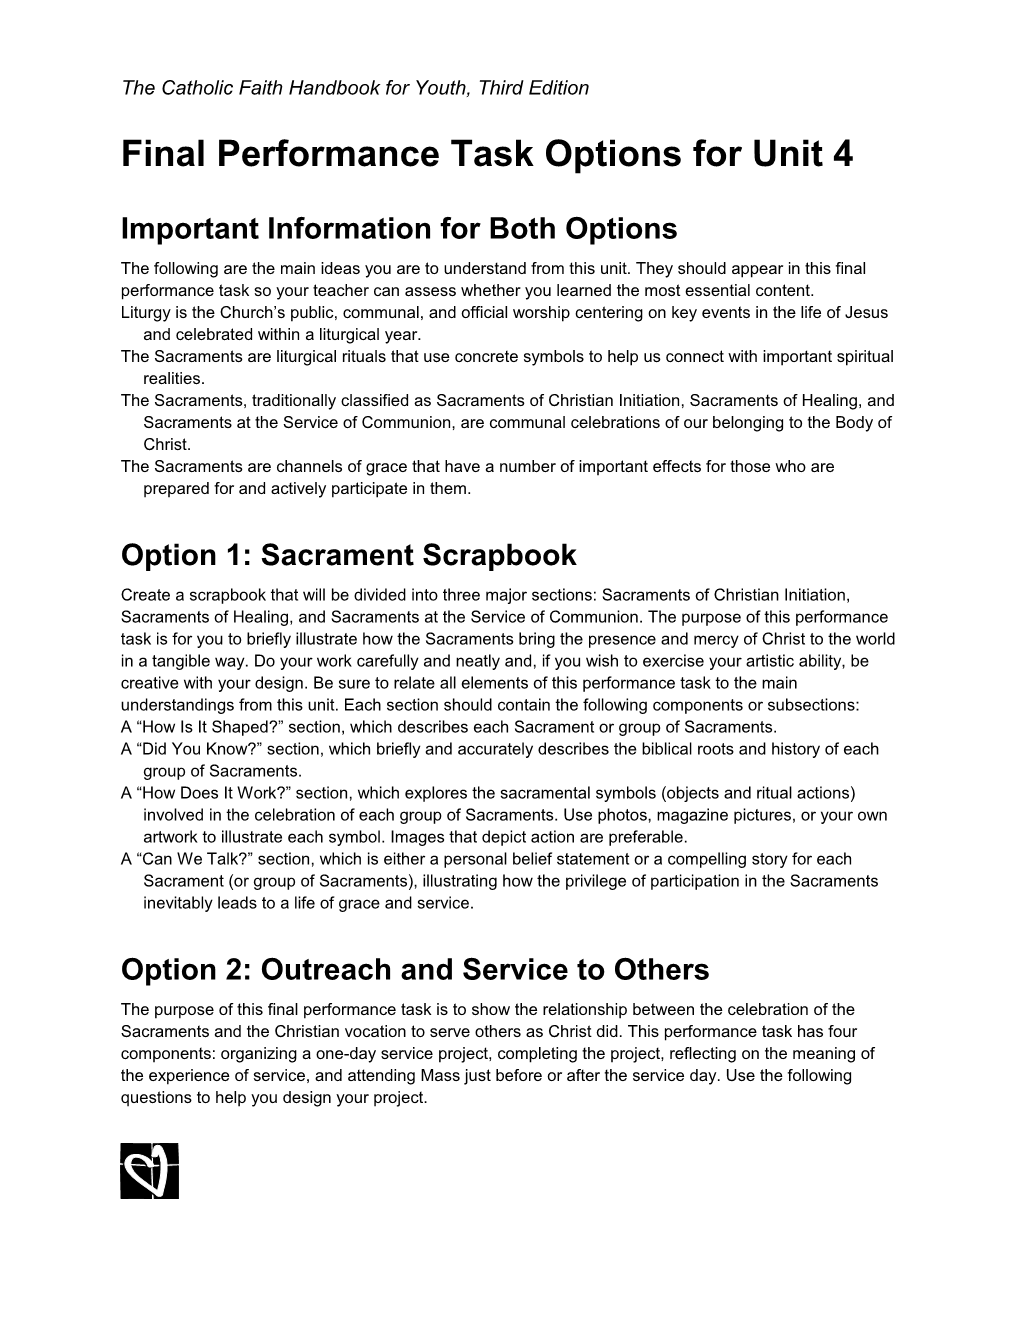 Final Performance Task Options for Unit 4